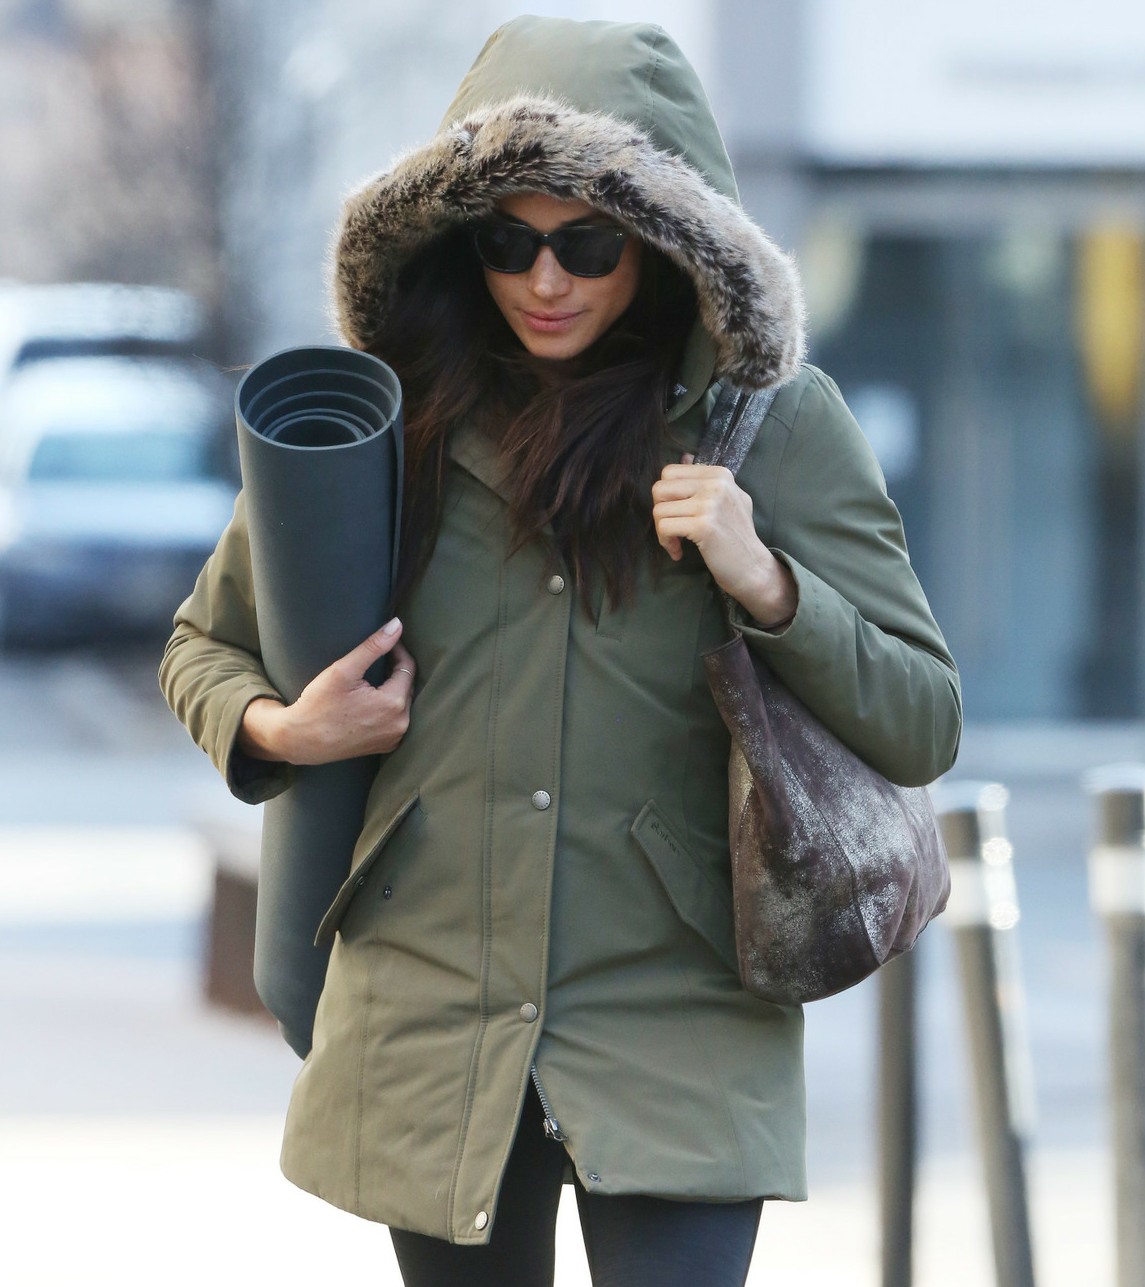 Prince Harry's girlfriend Meghan Markle leaves Yoga in Toronto, Canada. Currently in a extreme weather alert for the Toronto area. Meghan was doing a Hot Yoga session that lasted 1 hour and 15 minutes.